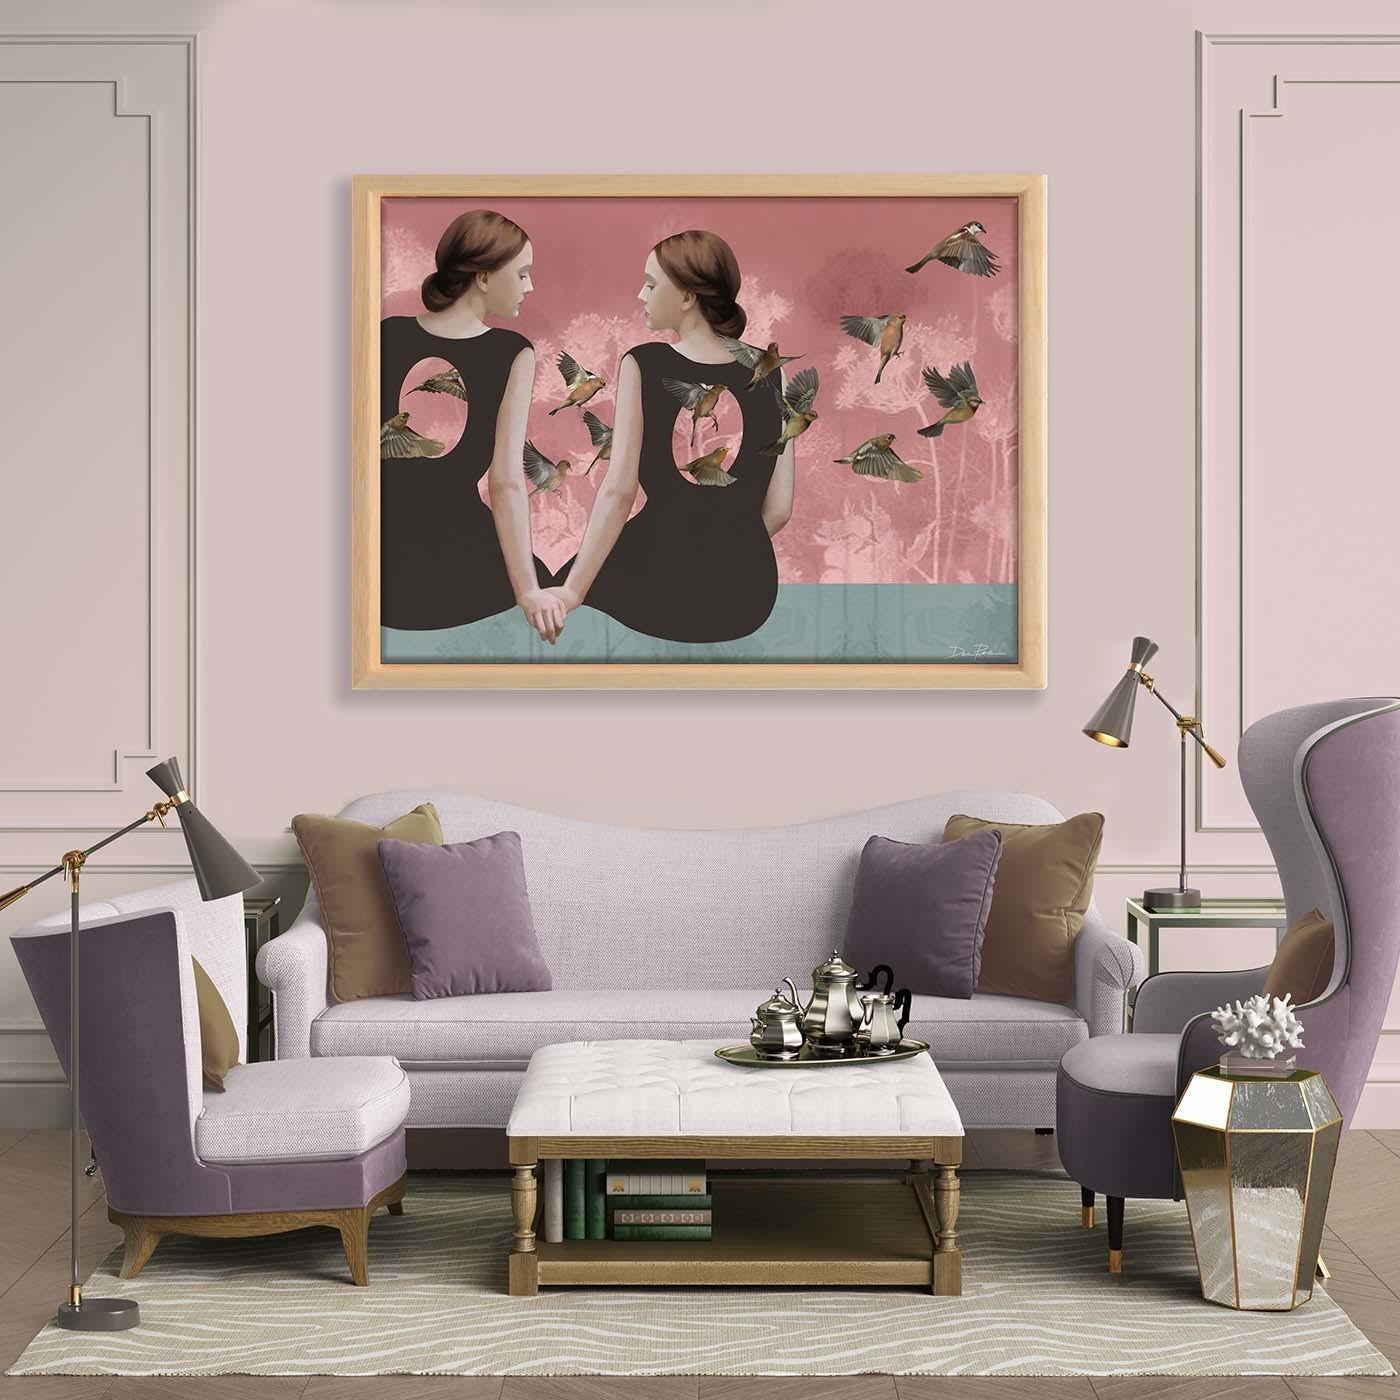 Part of a signed and numbered Limited Edition, this Pop-Surrealist digital painting depicts the intimate bond between two female figures holding hands. A flock of bird passes by, representing their secret, shared imagination. Printed on high-quality